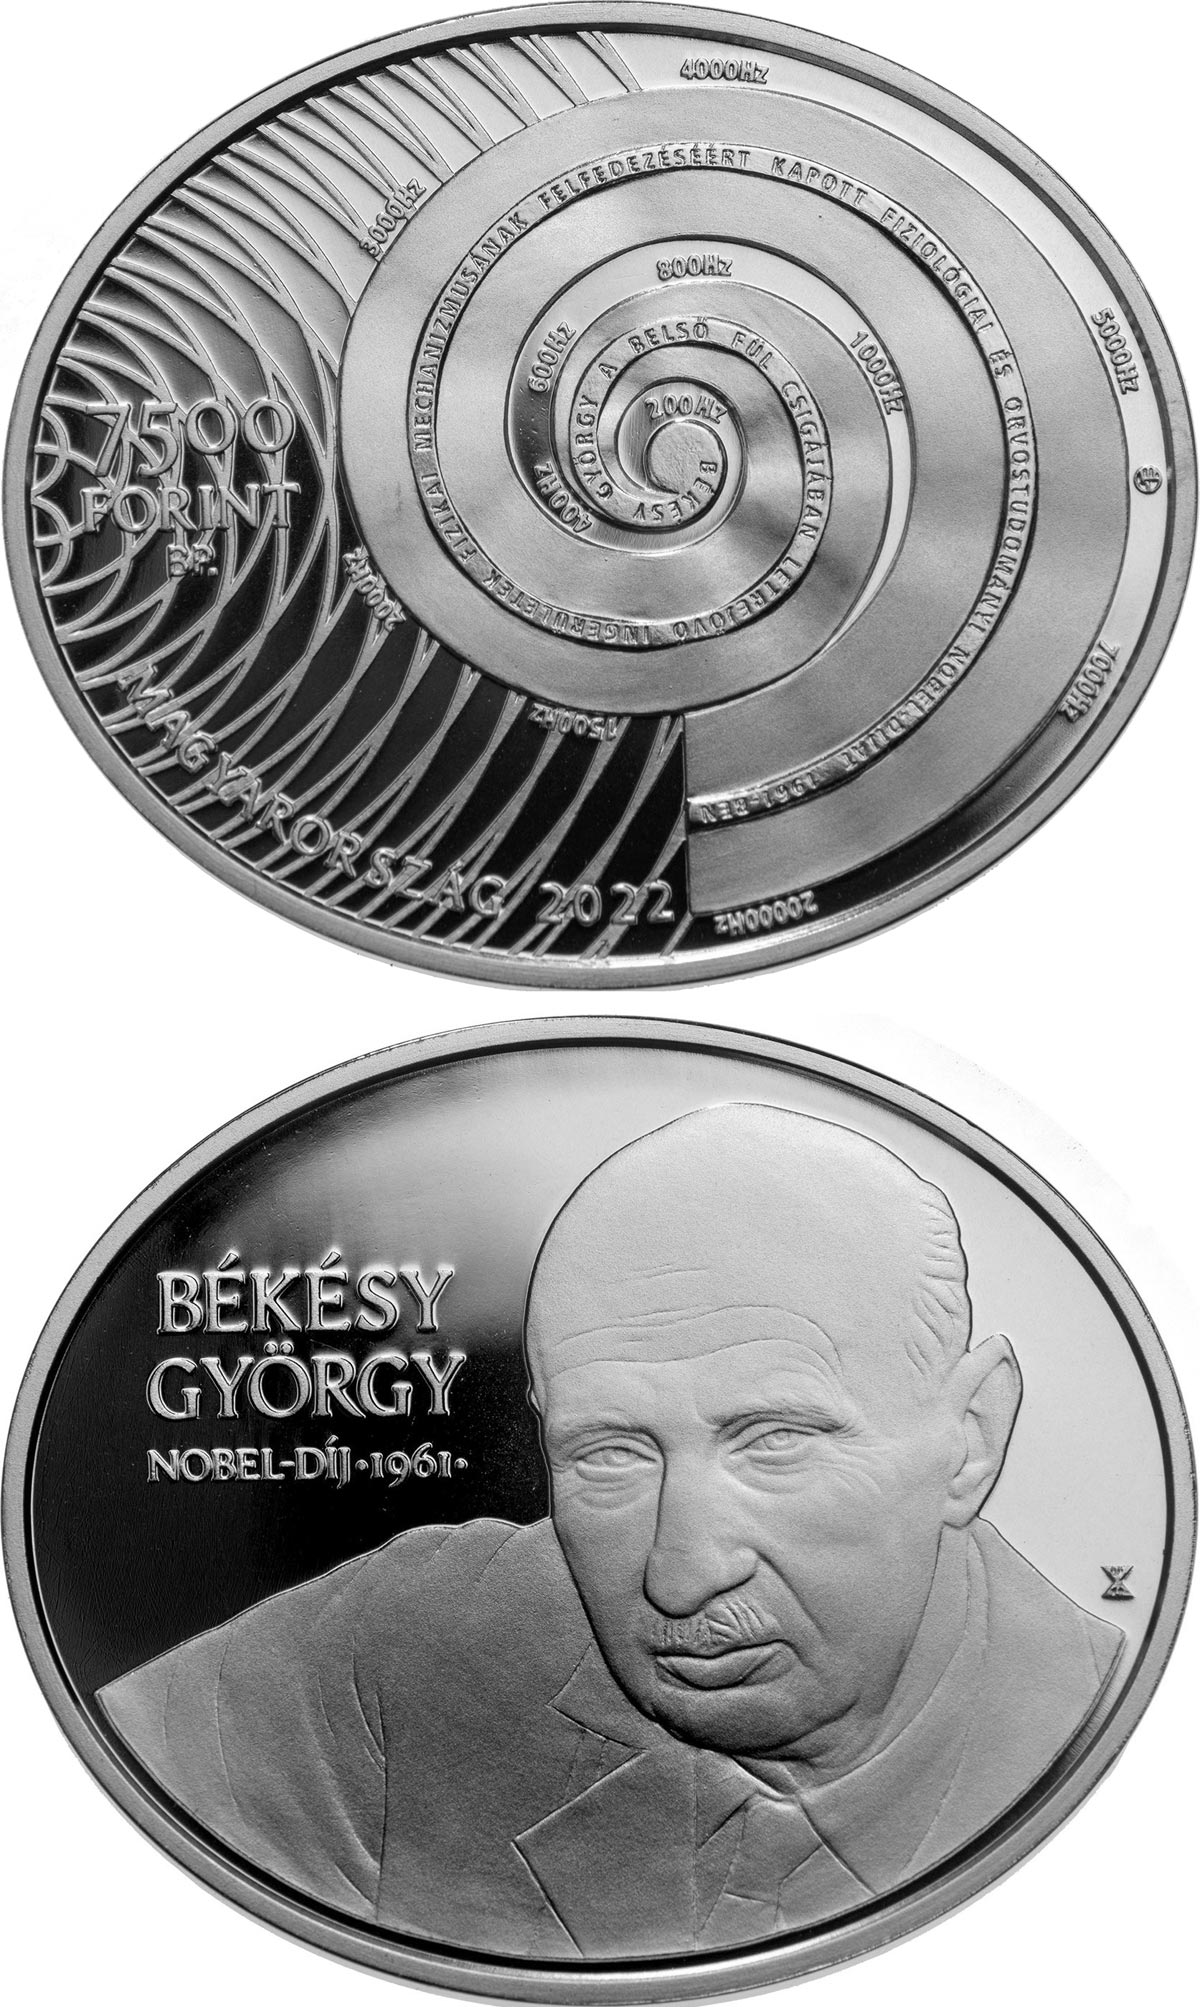 Image of 7500 forint coin - György Békésy | Hungary 2022.  The Silver coin is of Proof quality.